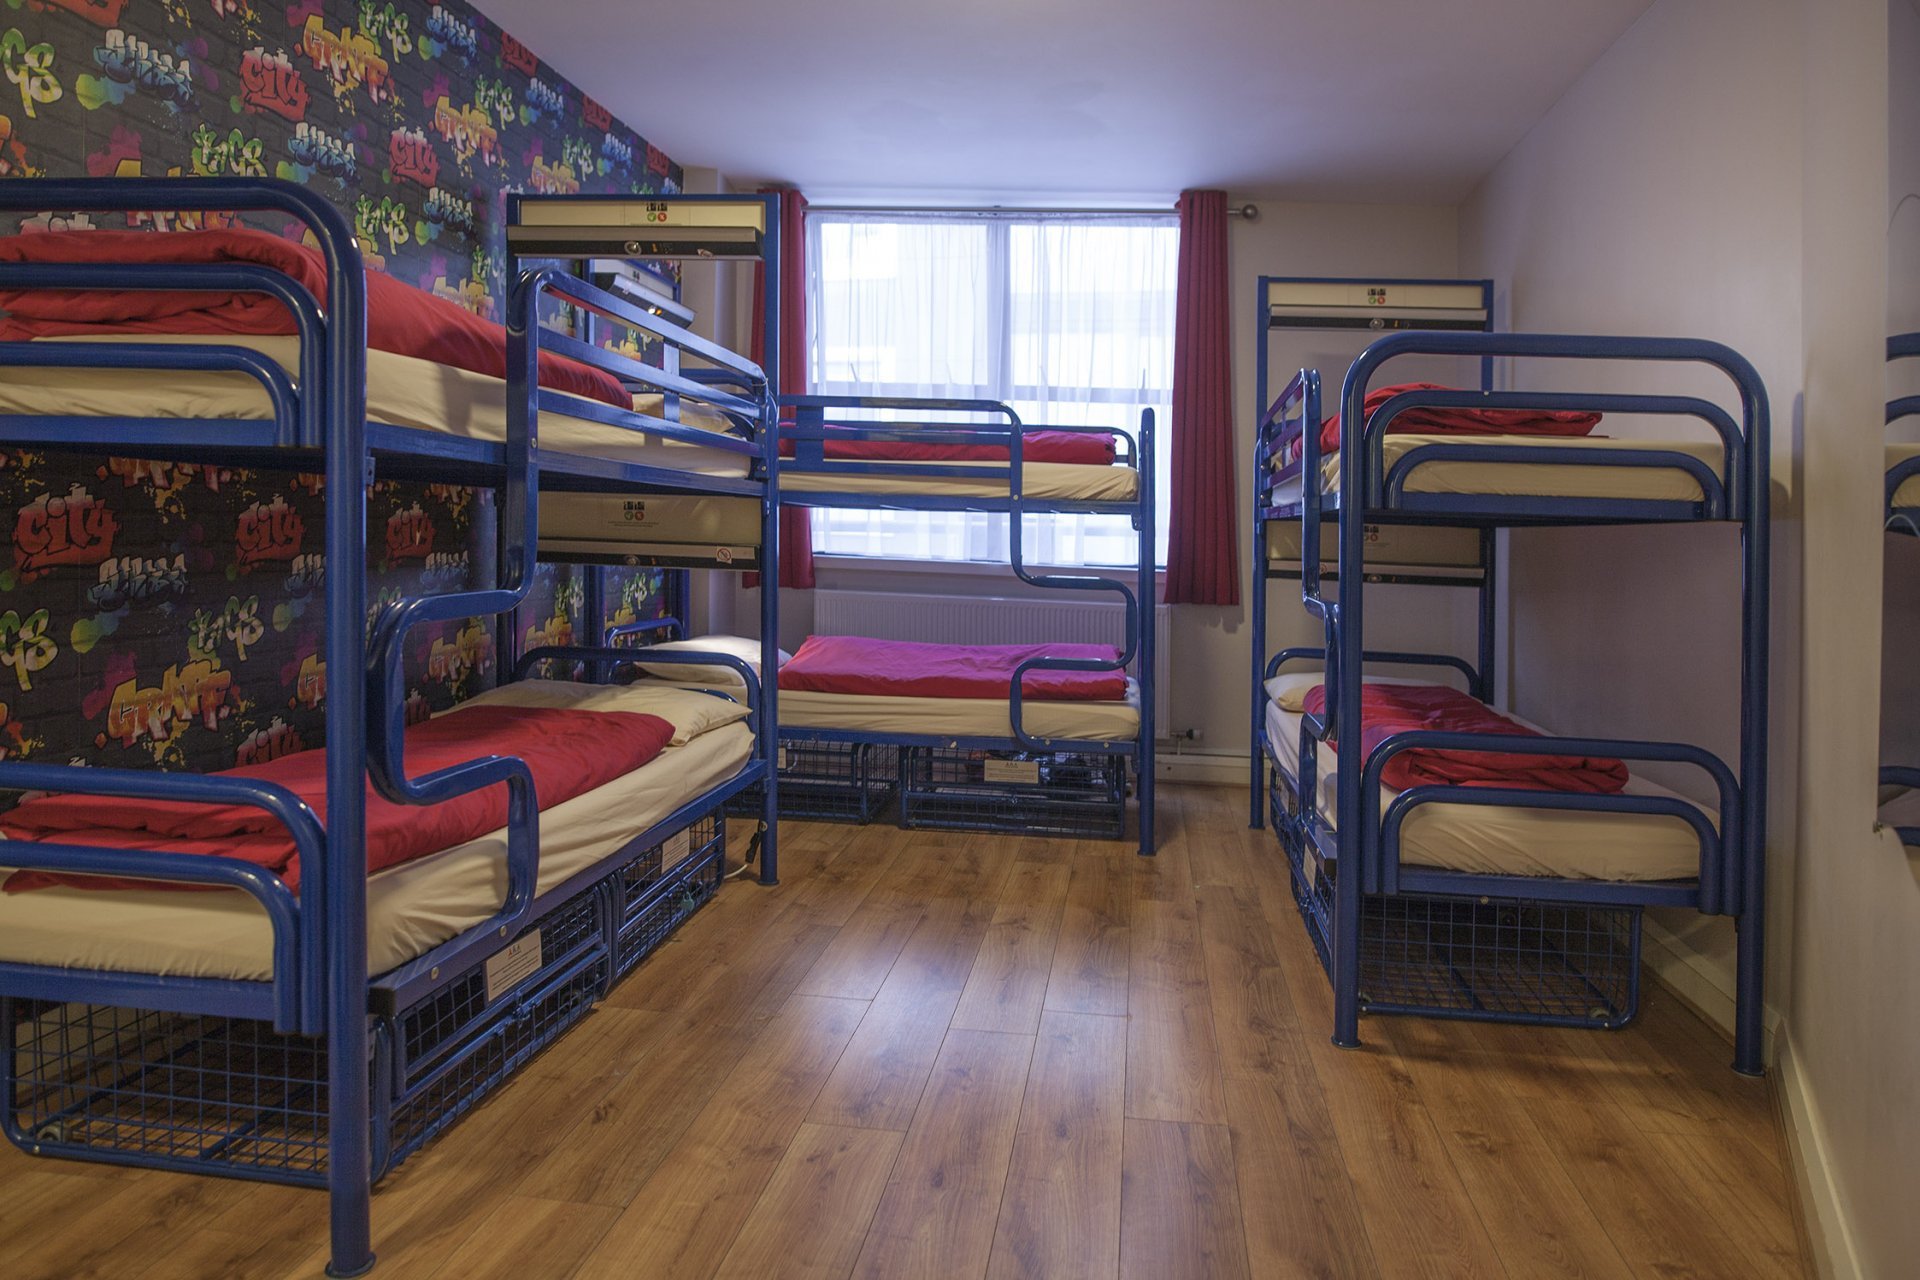 Prepared for New Student Group Six Beds in Multi Occupancy Room in Tourist Hostel Accommodation